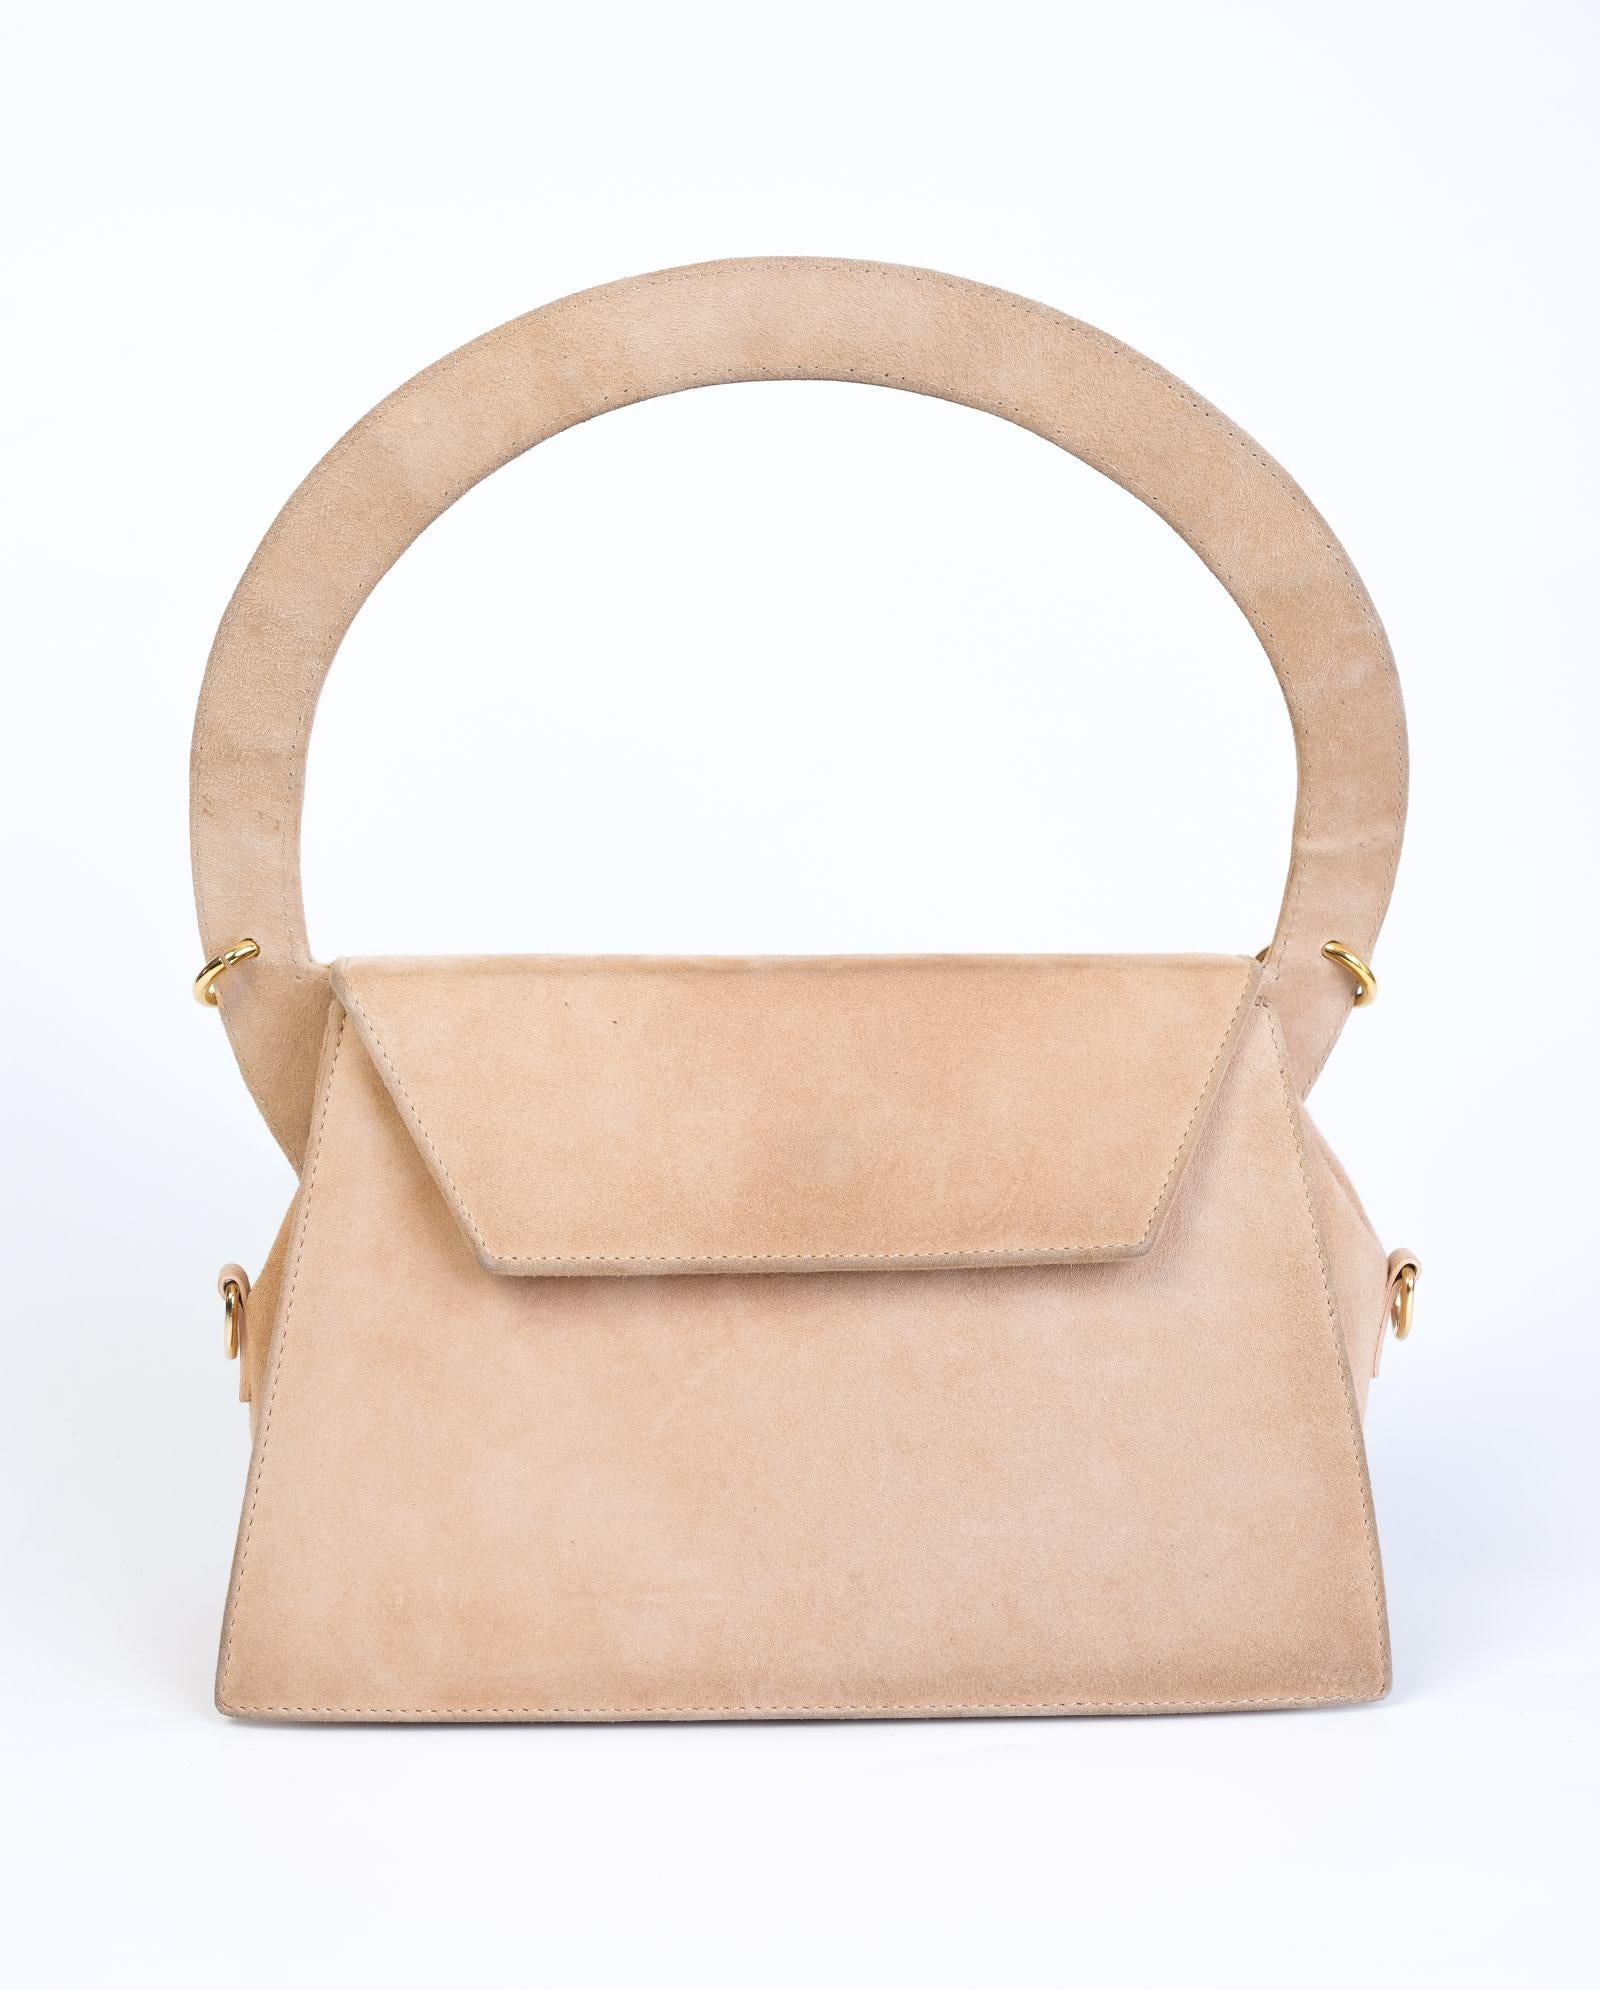 Handcrafted with suede leather, this style has a top handle, a chain link embellishment, a fold over flap closure and designer logo plaque on the front.

COLOR: Nude
MATERIAL: Suede
MEASURES: H 13” x L  11” x D 4.1”
EST. RETAIL: $1000
COMES WITH: